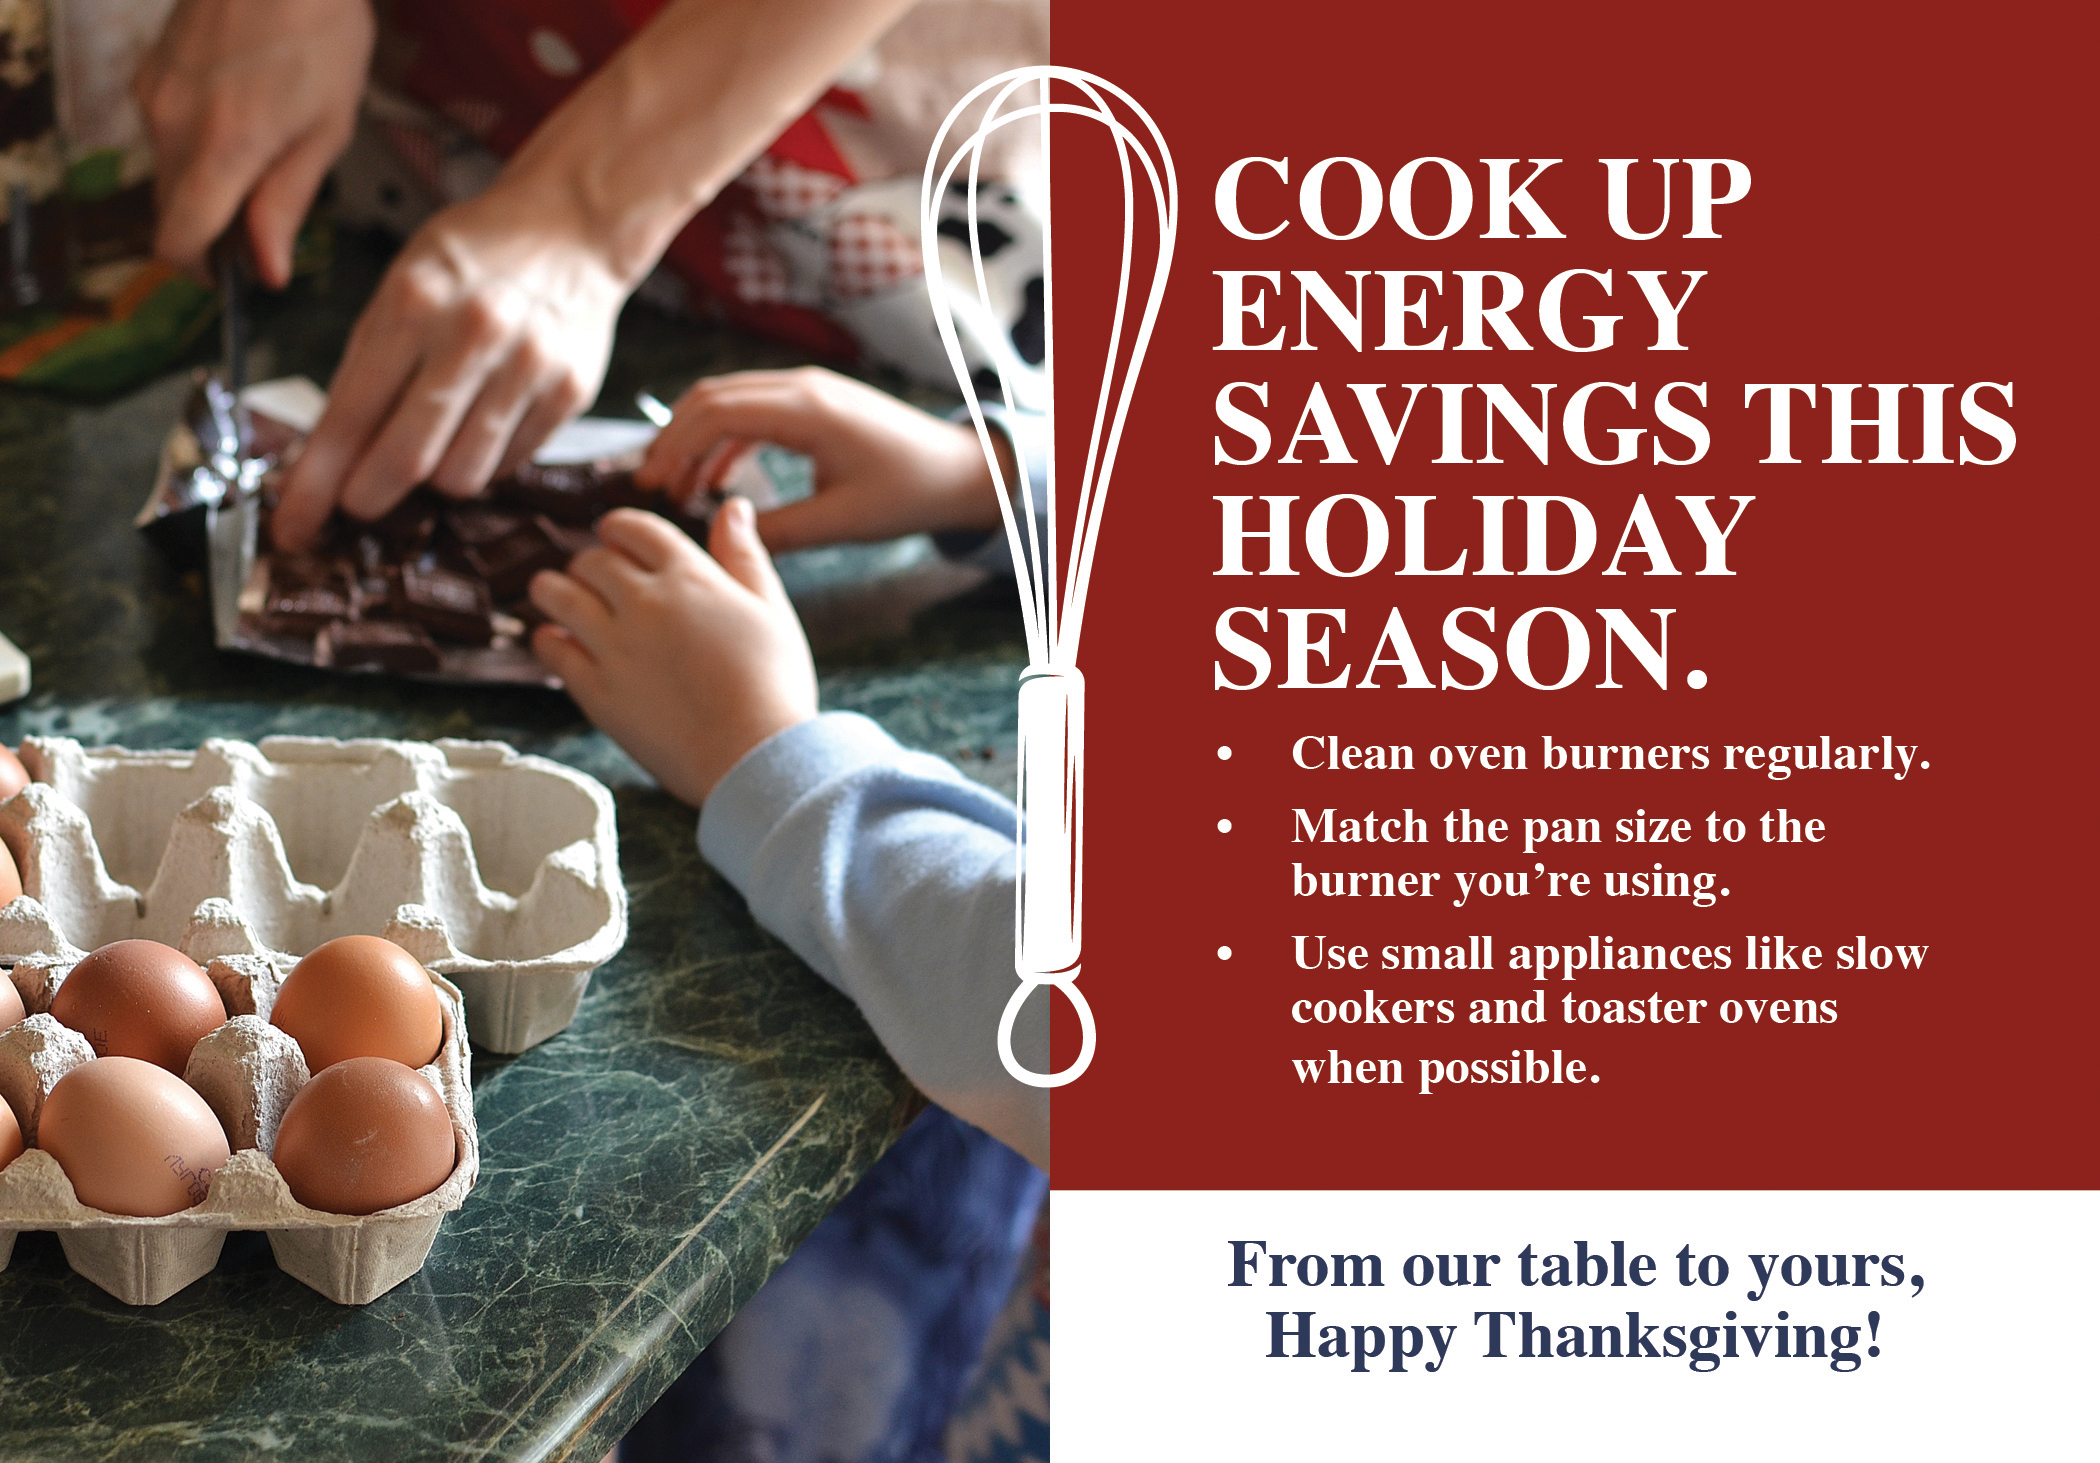 COOK UP ENERGY SAVINGS THIS HOLIDAY SEASON. - Clean oven burners regularly - Match the pan size to the burner you're using. - Use small appliances like slow cookers and toaster ovens when possible. From our table to yours, Happy Thanksgiving!